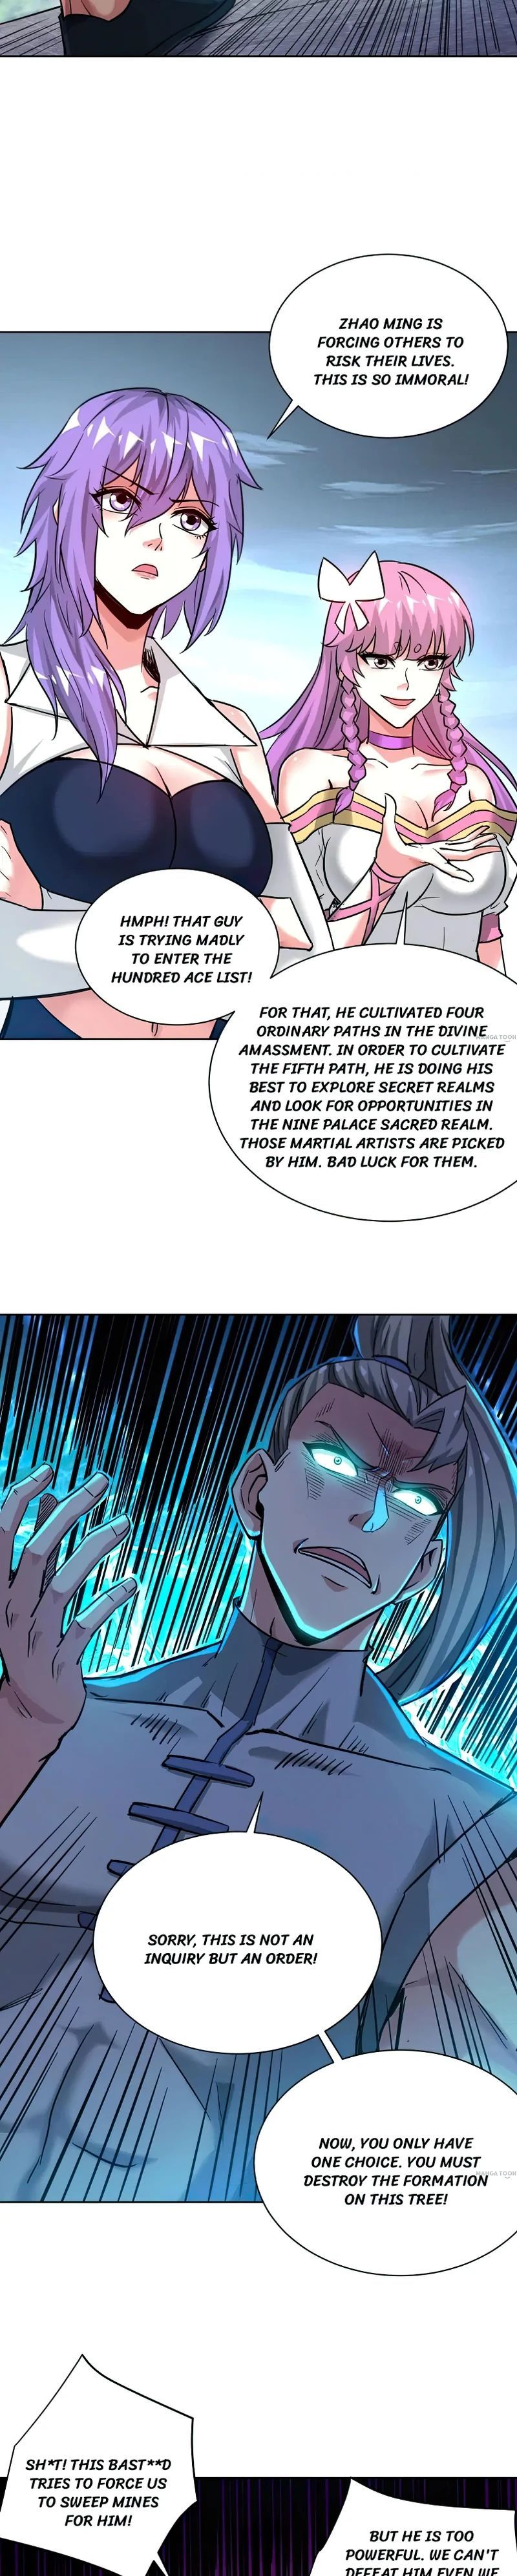 The First Son-In-Law Vanguard of All Time Chapter 269 page 11